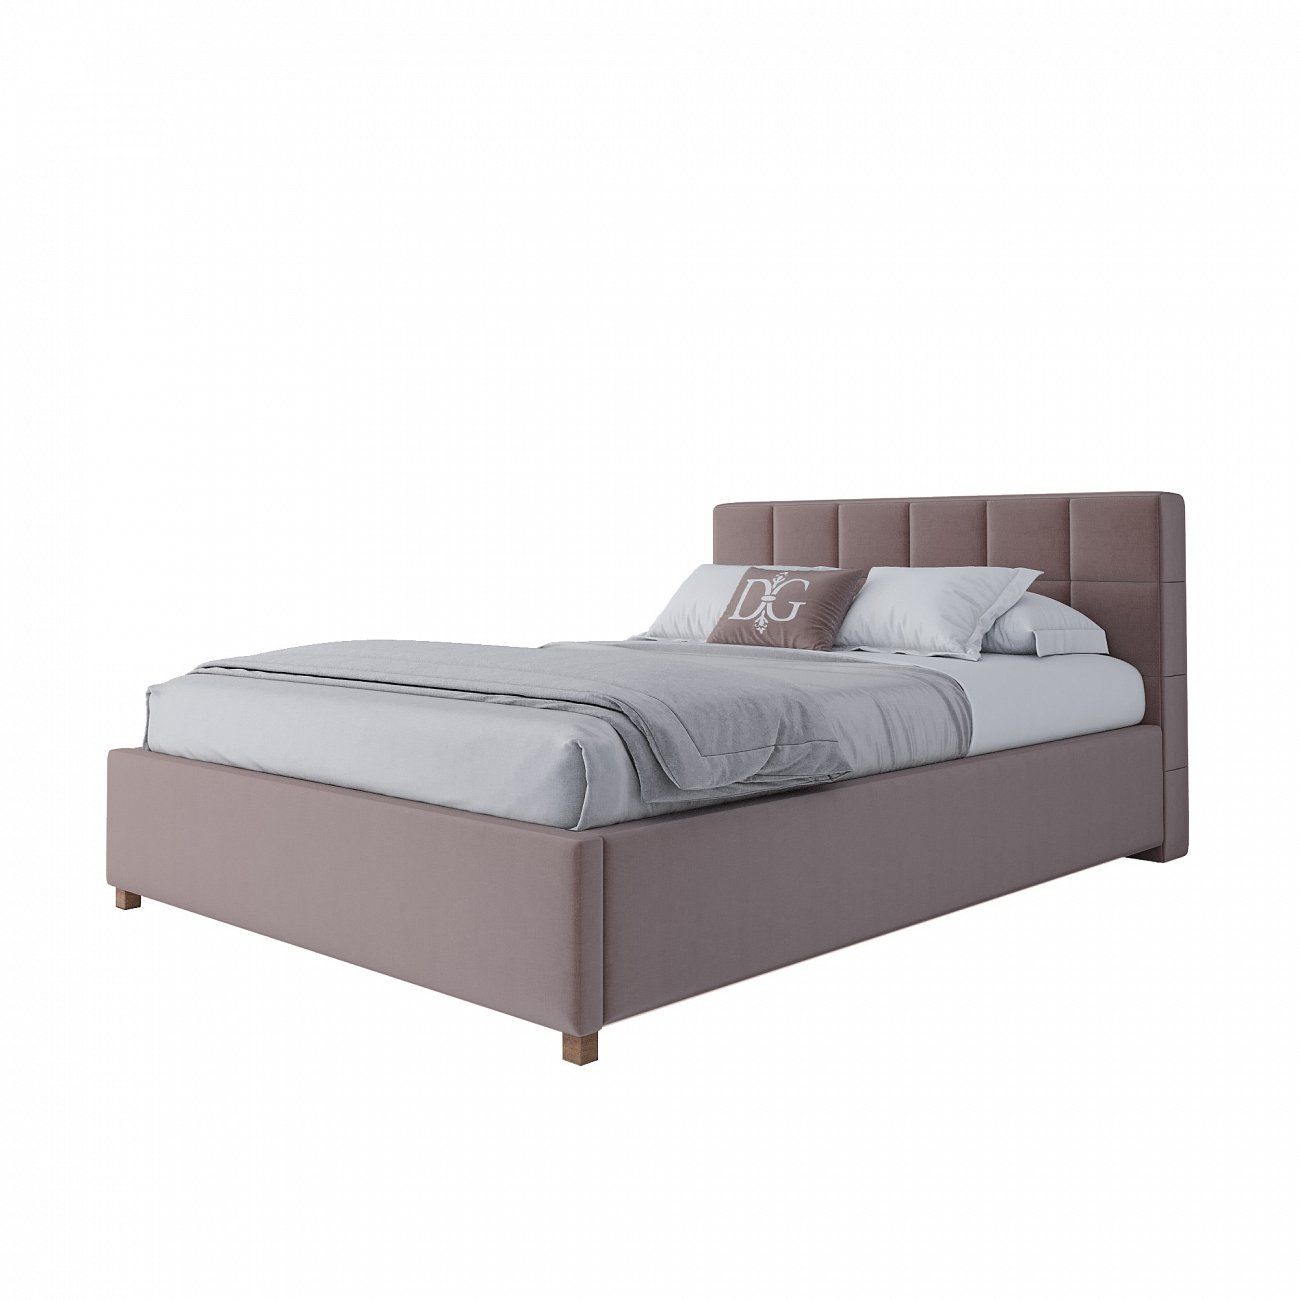 Teenage bed with upholstered headboard 140x200 cm dusty rose Wales